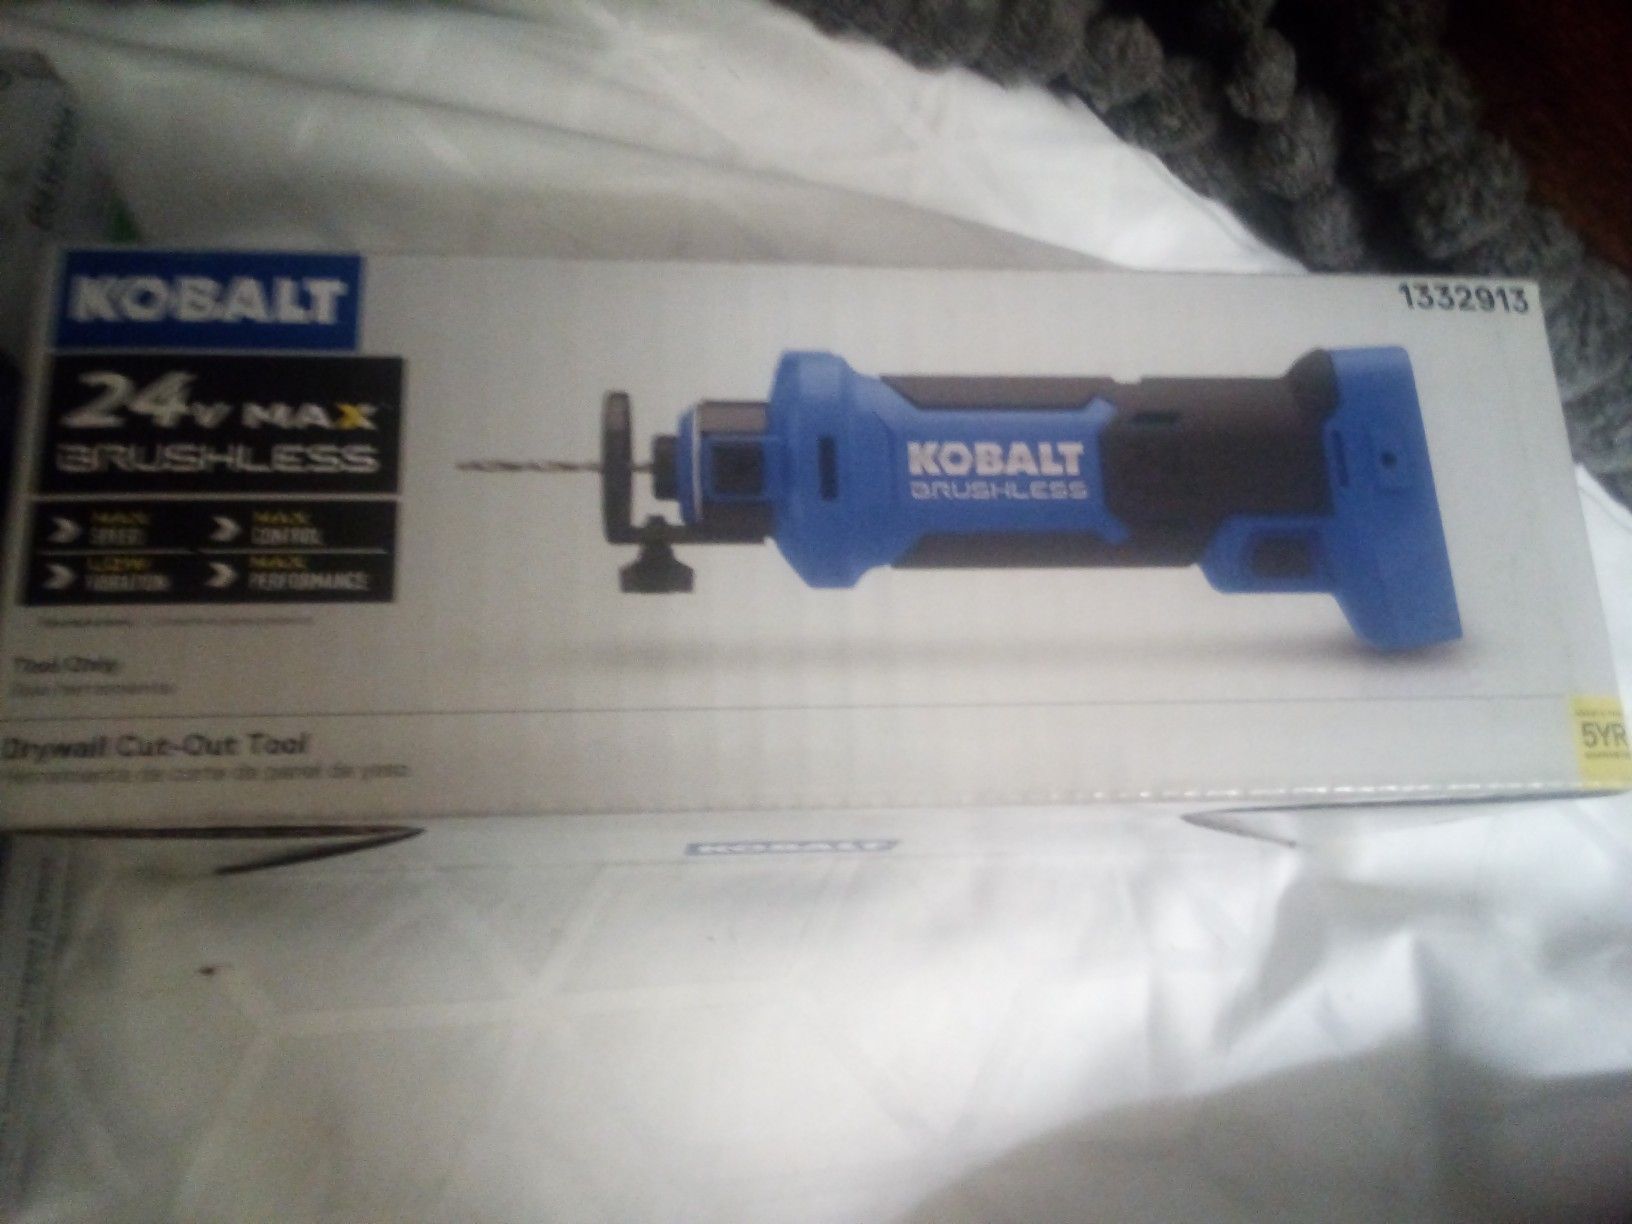 Kobalt 24 volt brushless lithium ion Drywall Cut-Out tool (Bare Tool)